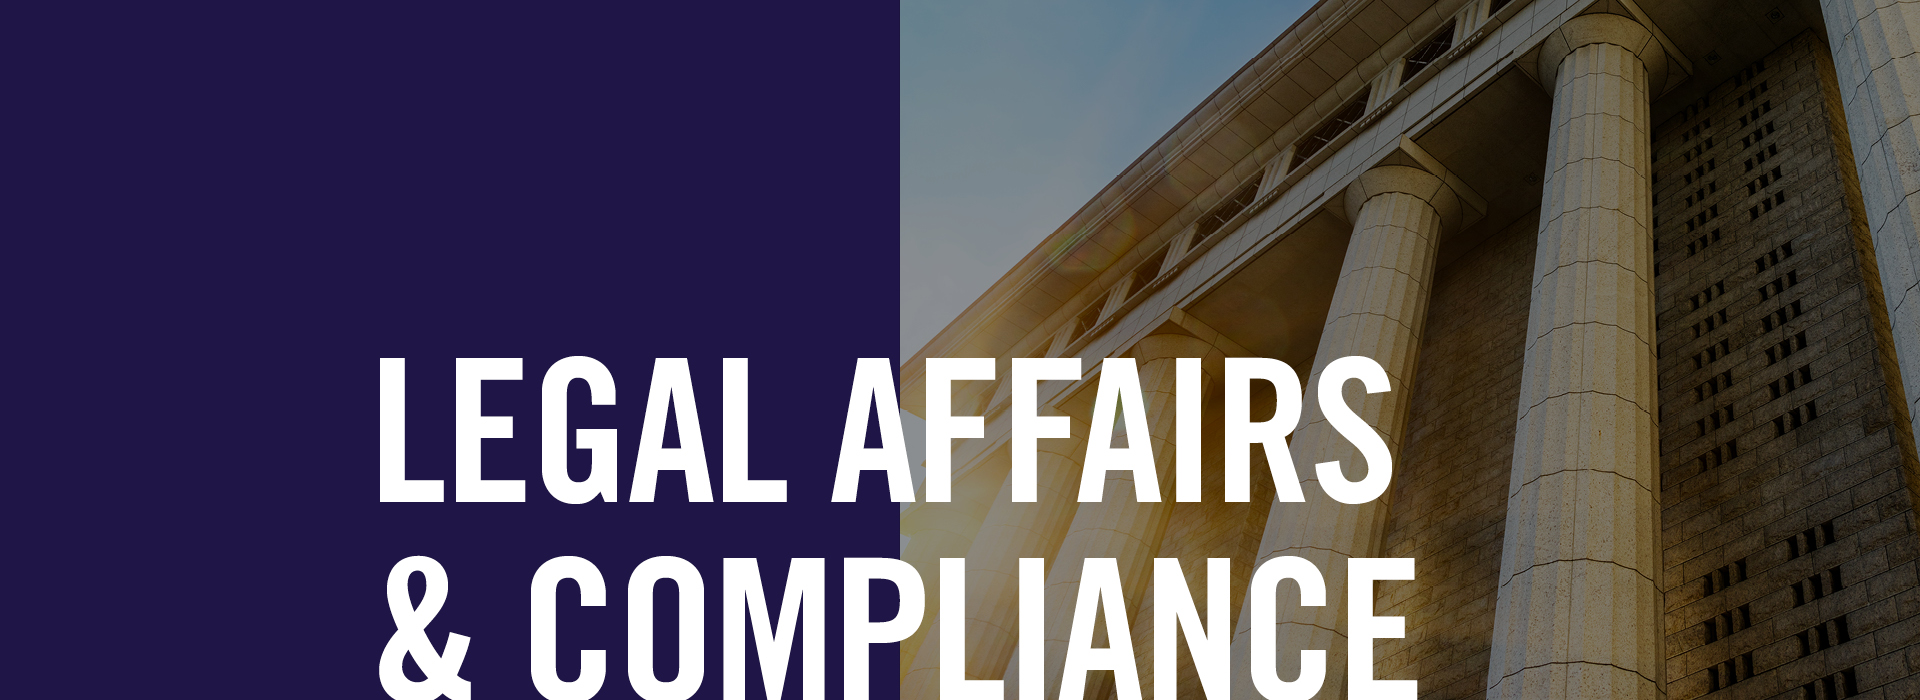 Legal Affairs and Compliance